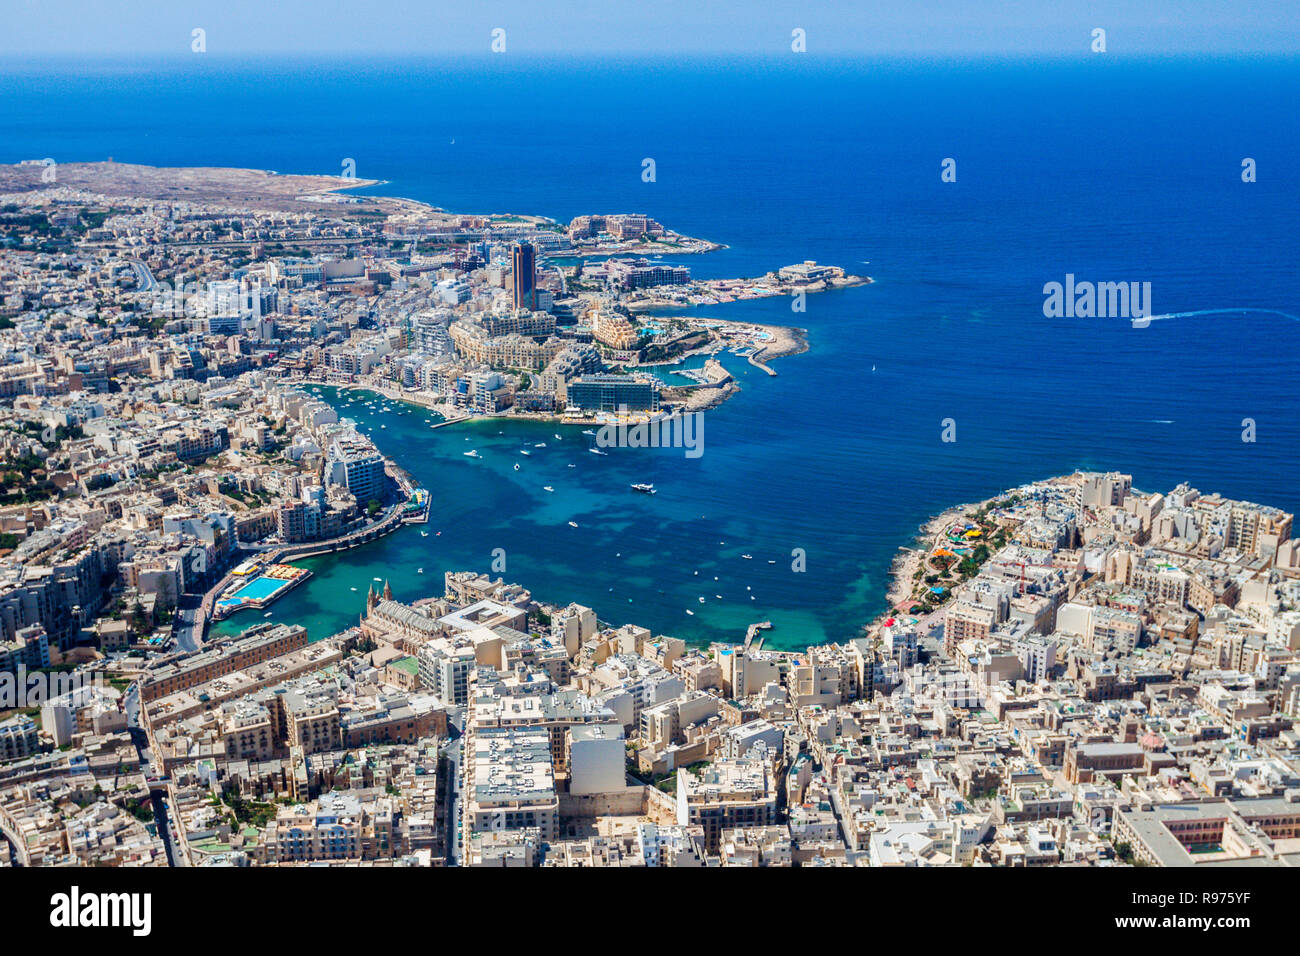 Malta aerial view. St. Julian's (San Giljan) and Tas-Sliema cities. St. Julian’s bay, Balluta bay, Spinola bay, Towns, harbours and coastline of Malta from above. Skyscraper in Paceville district. Stock Photo